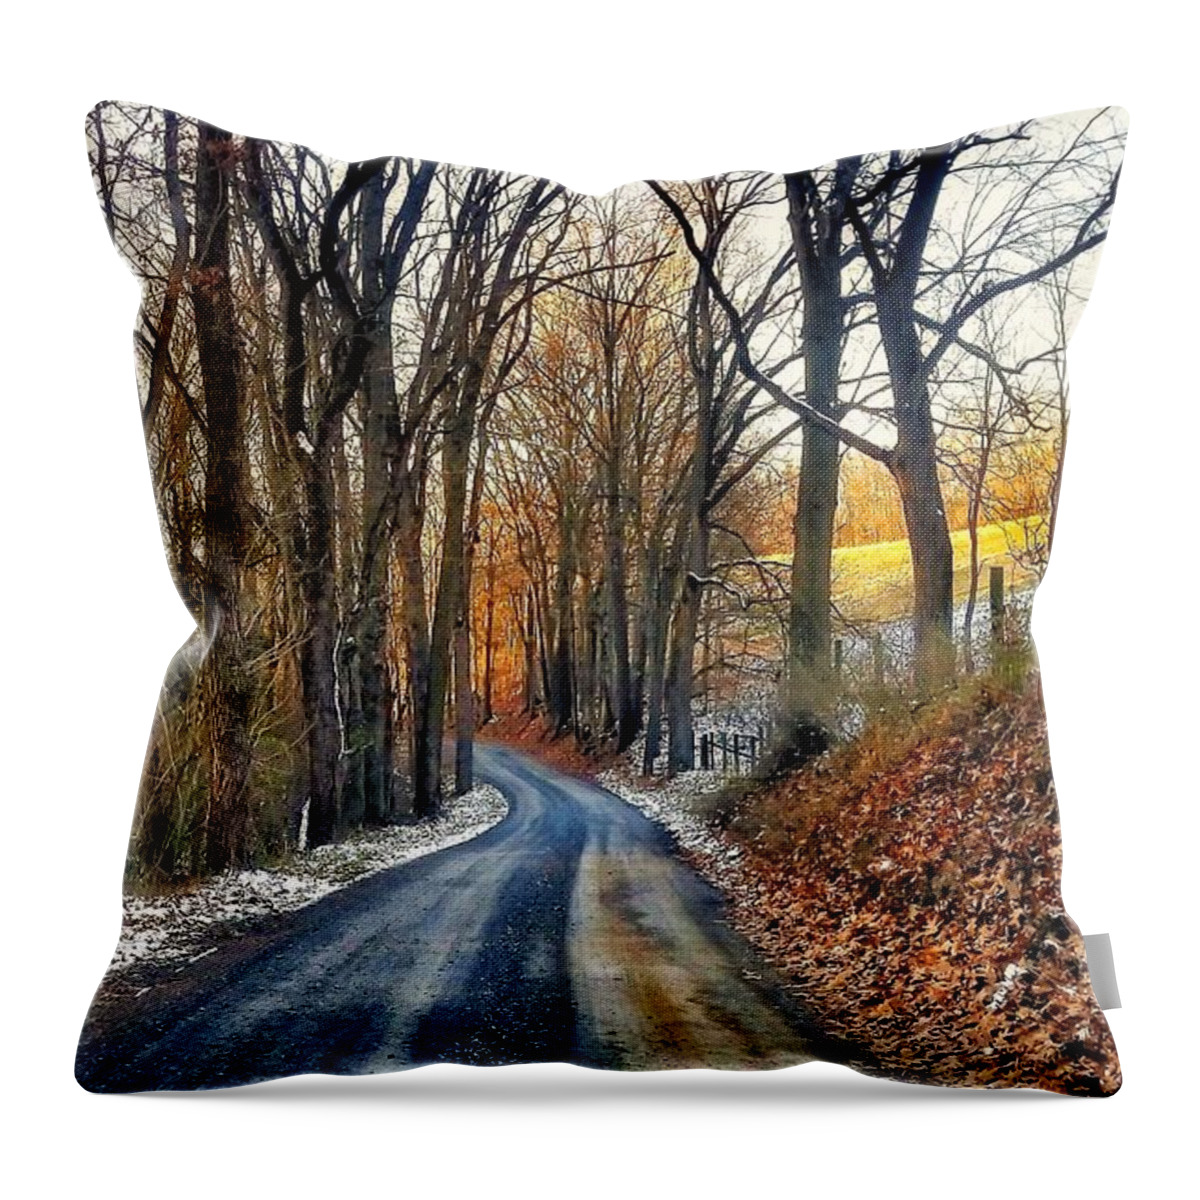 Photograph Throw Pillow featuring the photograph Winter Path by Jim Harris